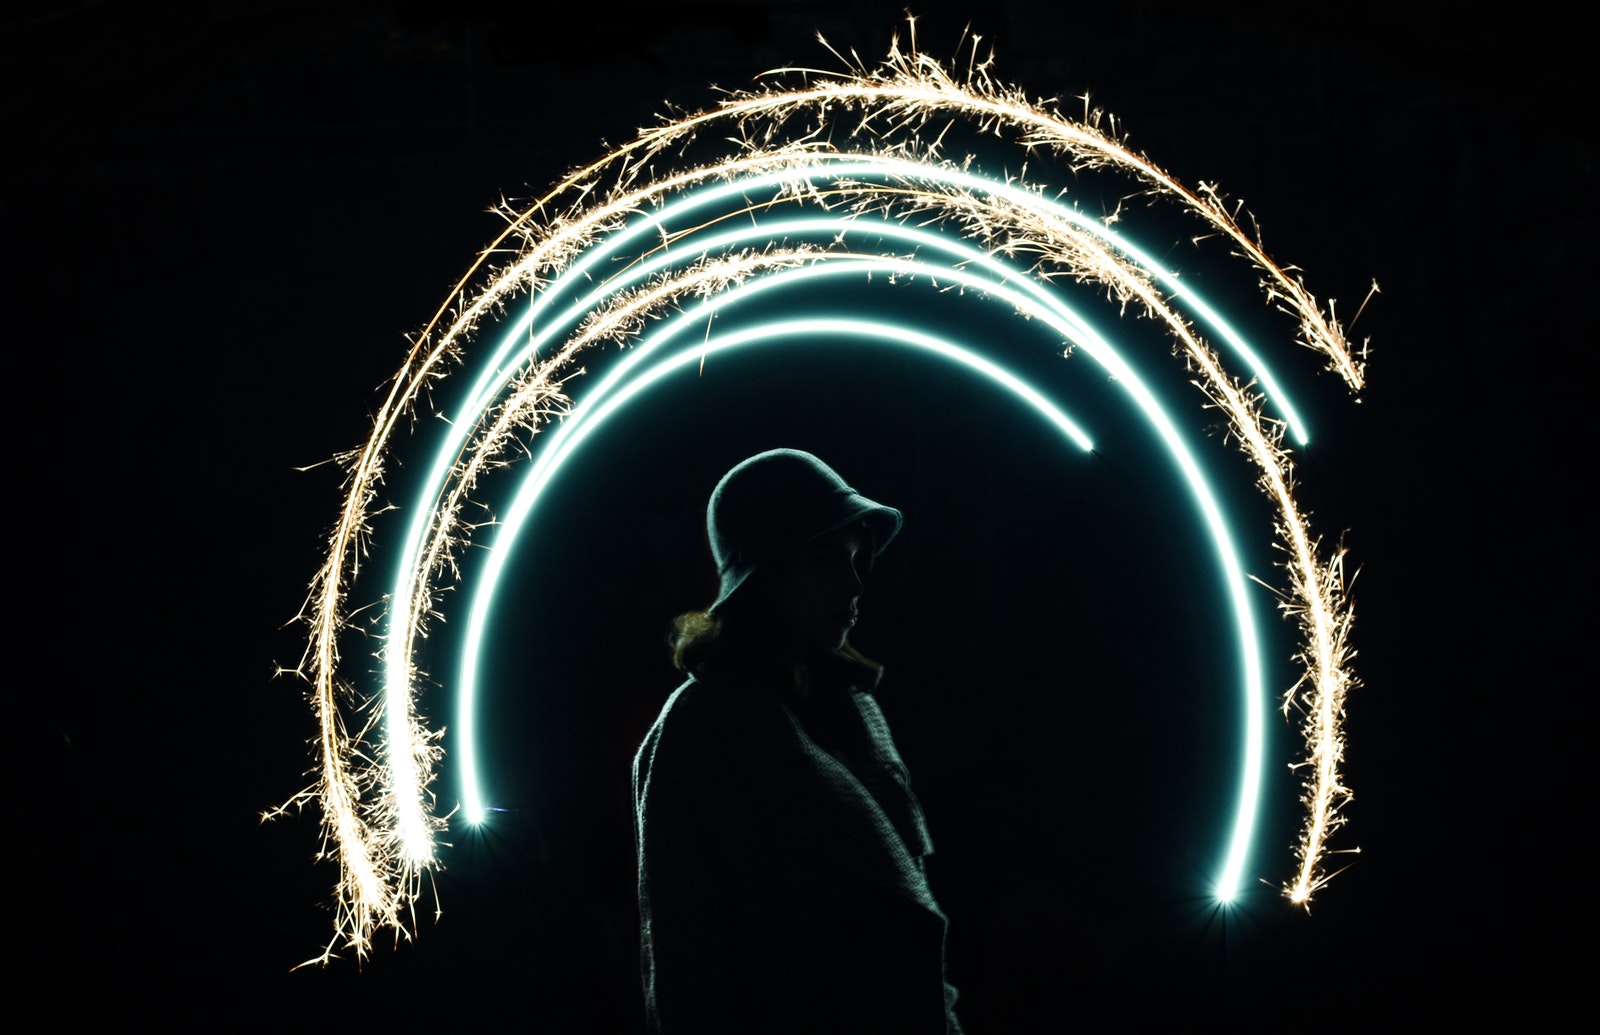 Time lapse Photo Of Semi-Circle Light Painting With A Woman In The Center